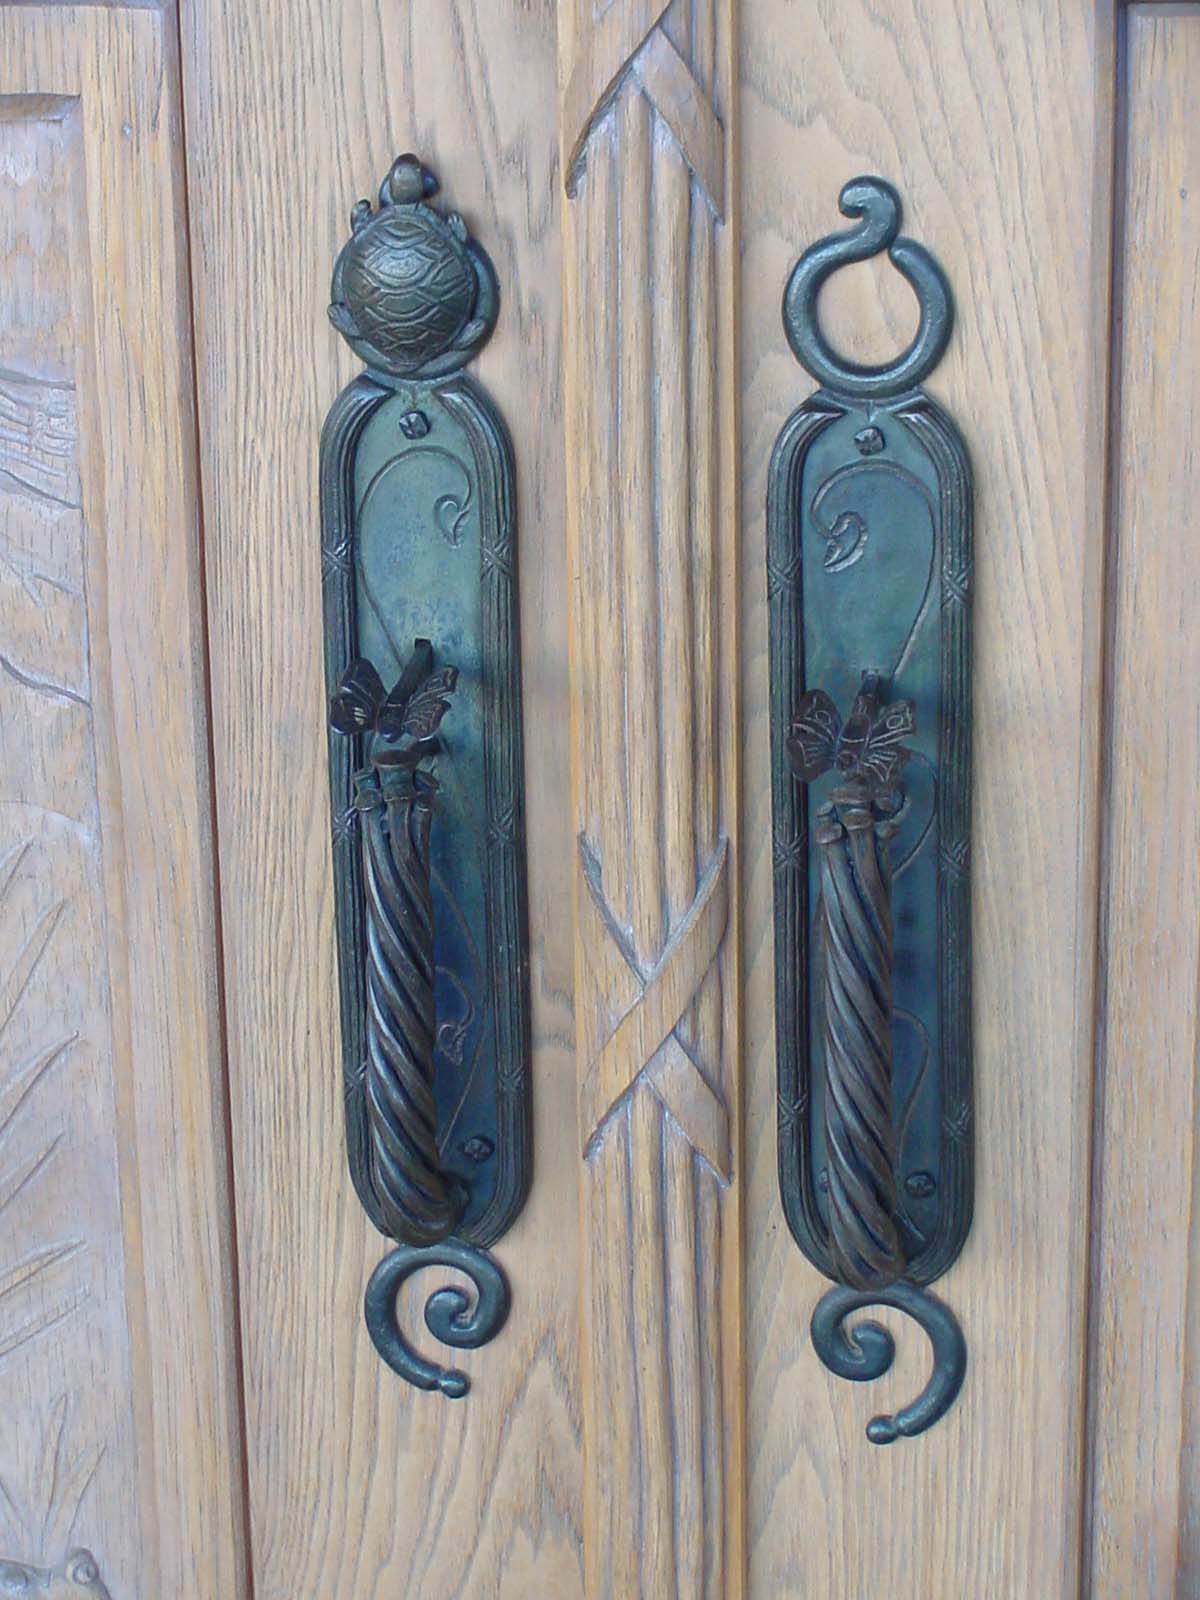 Fanciful entry door hardware. Hand forged and chased. Private residence Placitas NM.